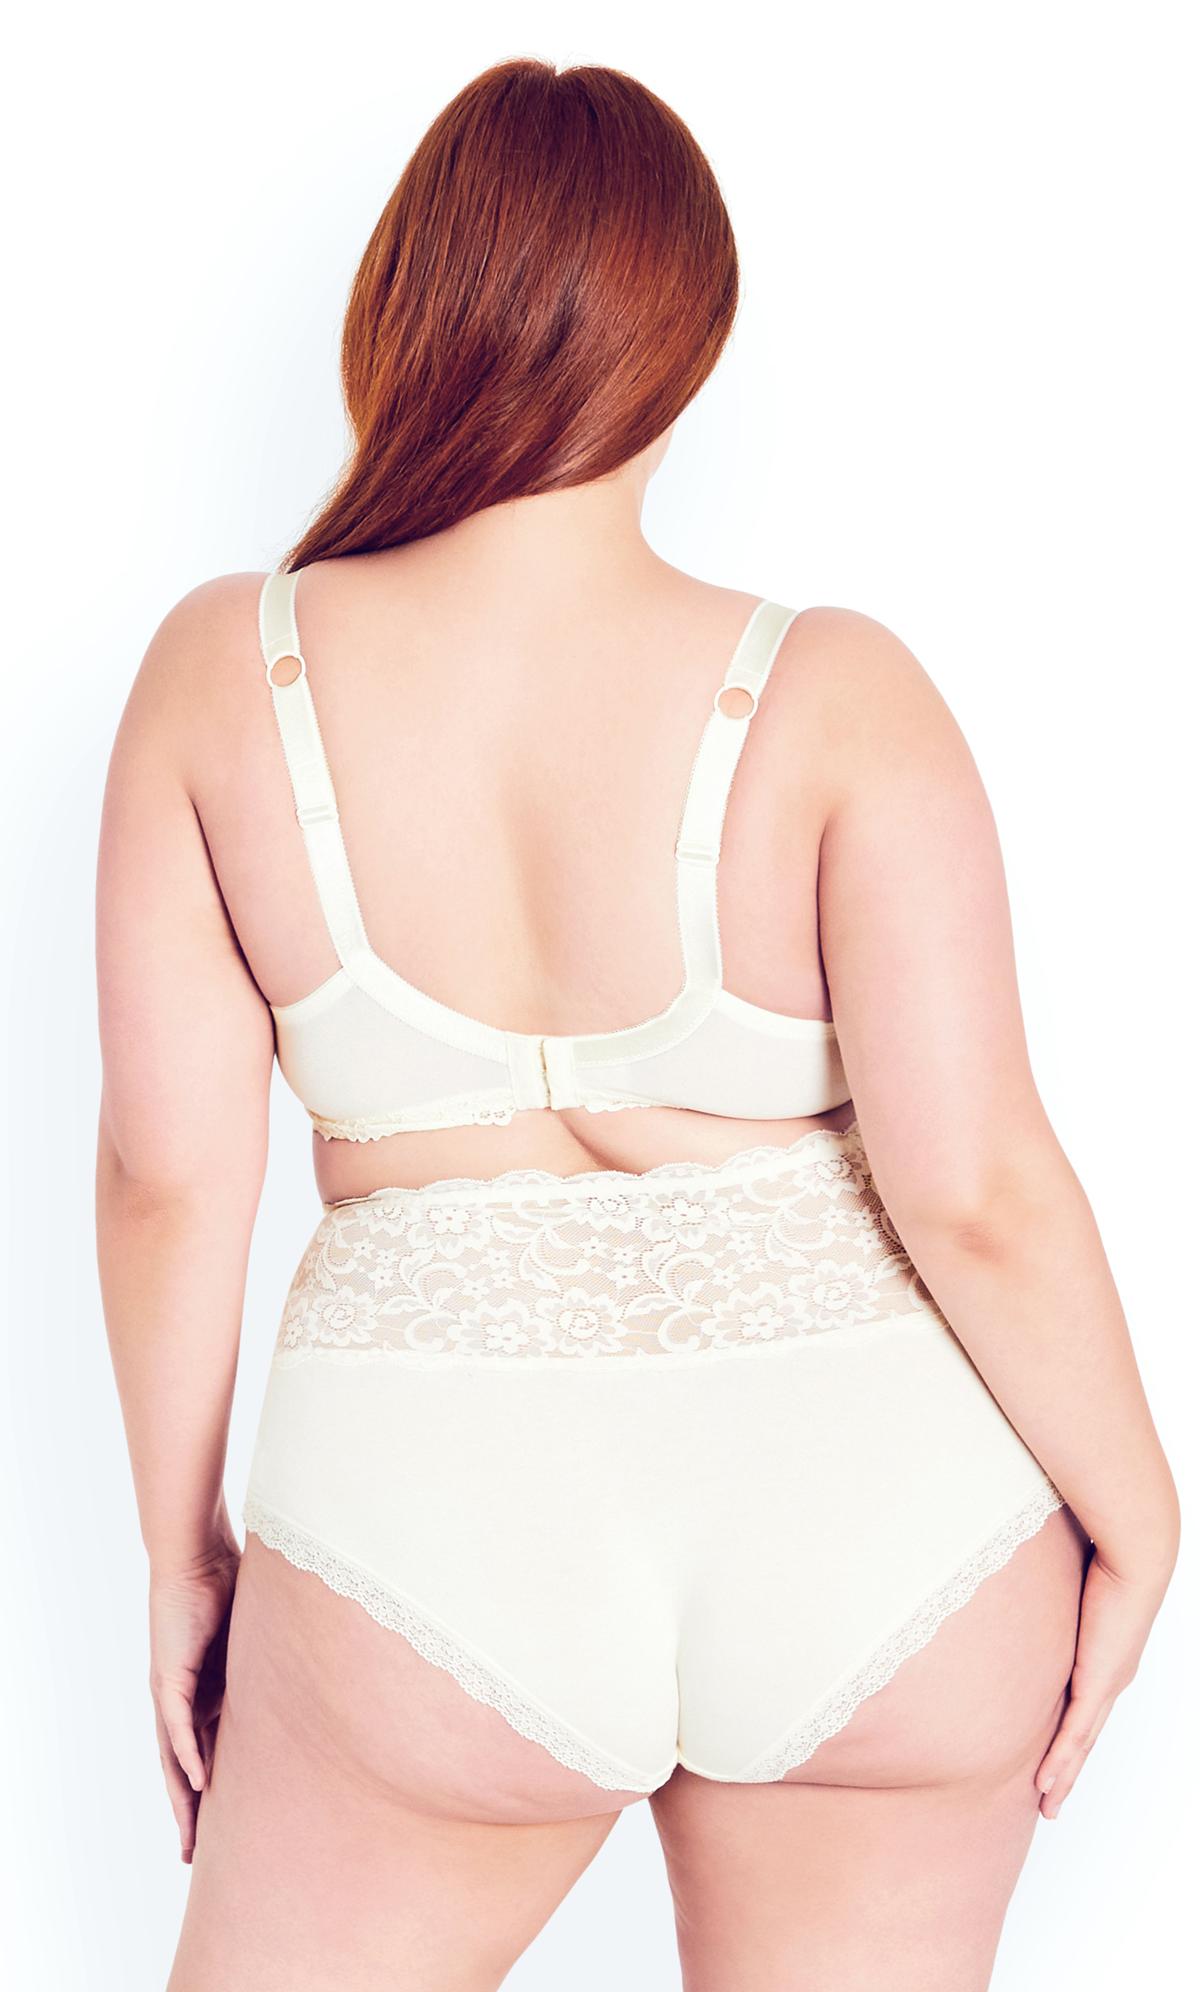 Hips & Curves Ivory Lace Full Coverage Bralette